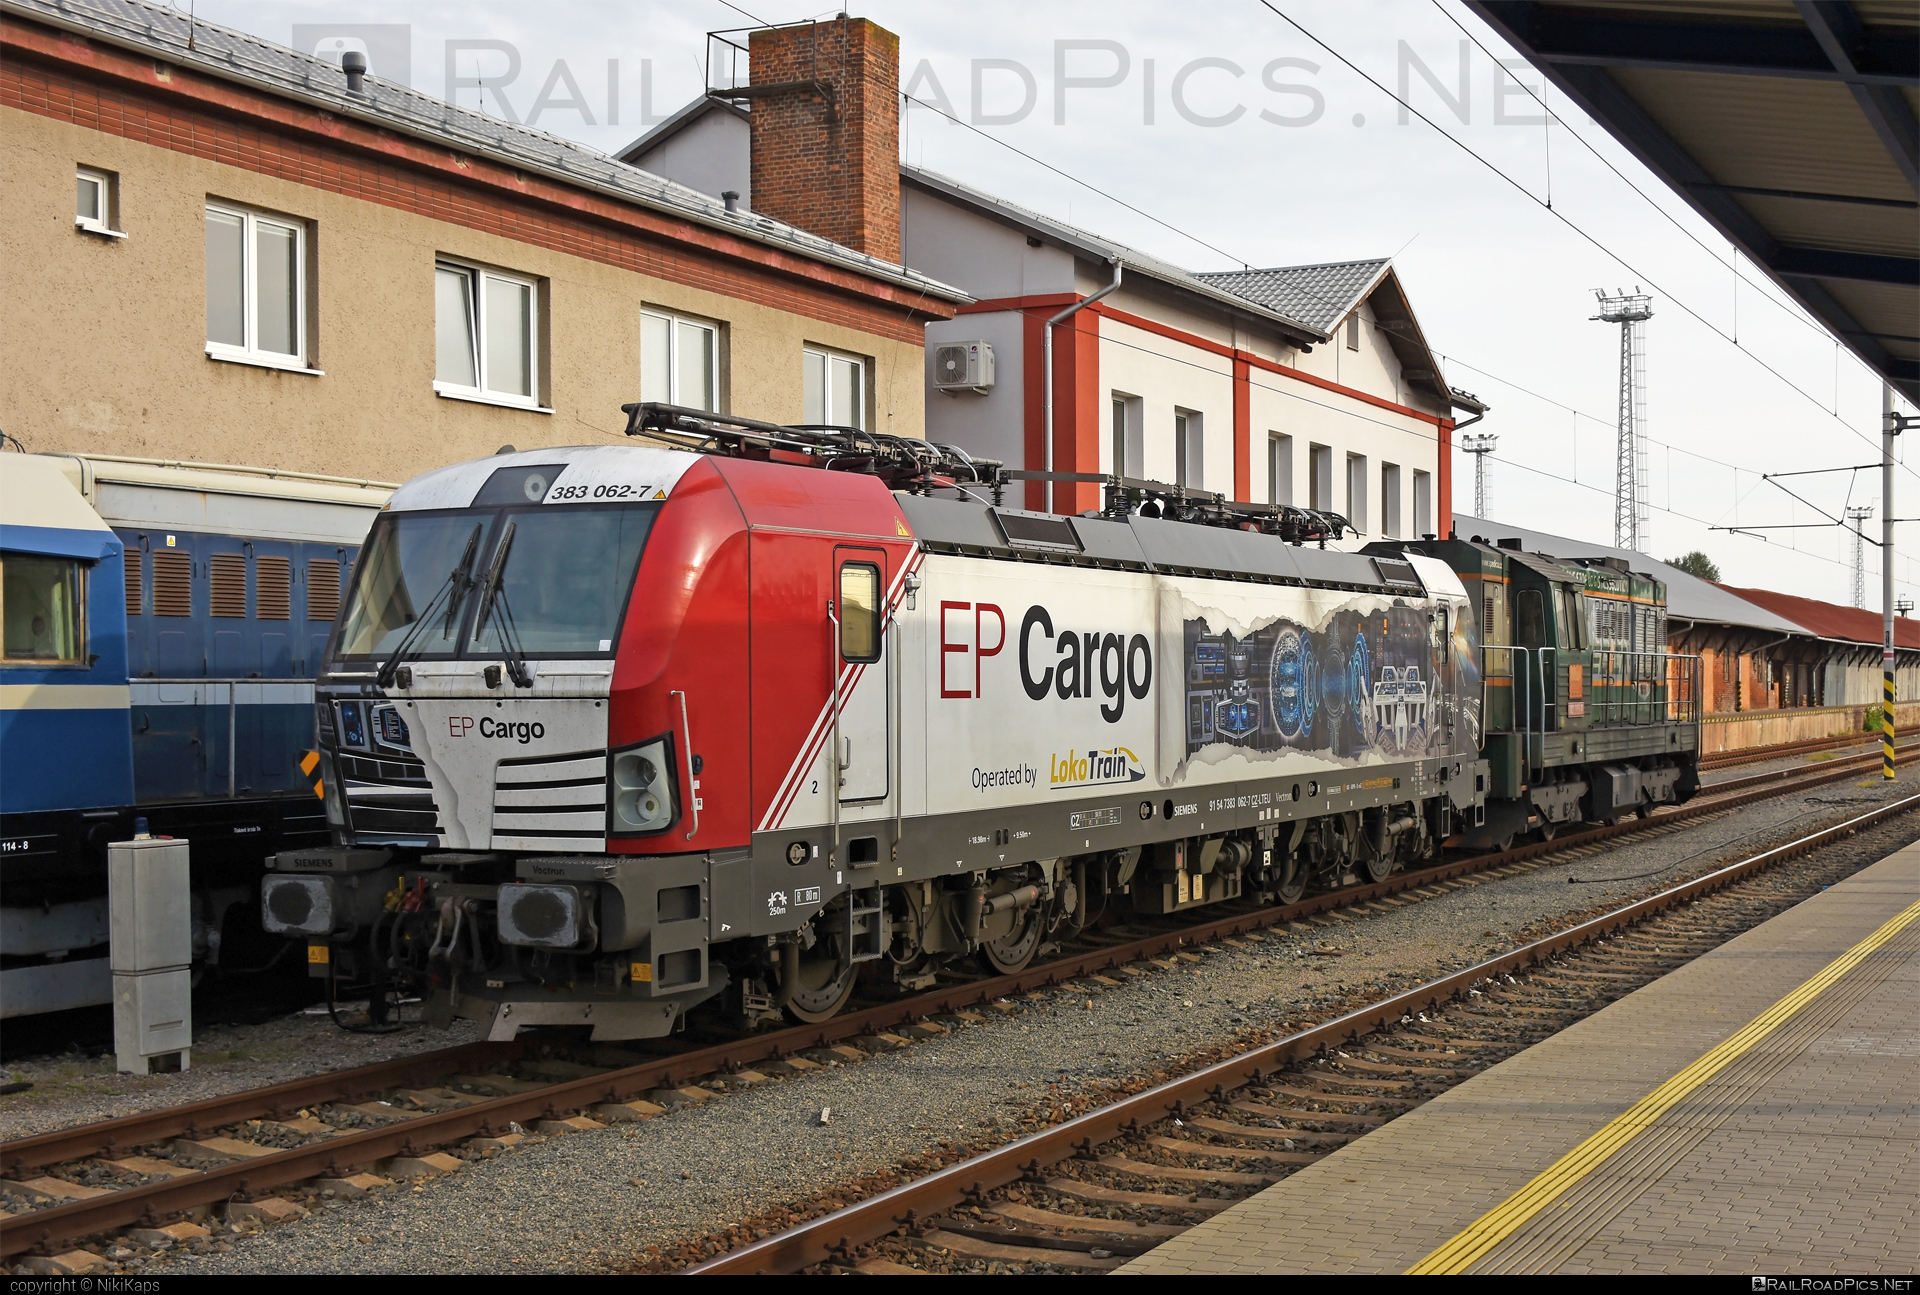 Siemens Vectron MS - 383 062-7 operated by Loko Train s.r.o. #epcargo #lokotrain #lokotrainsro #siemens #siemensVectron #siemensVectronMS #vectron #vectronMS